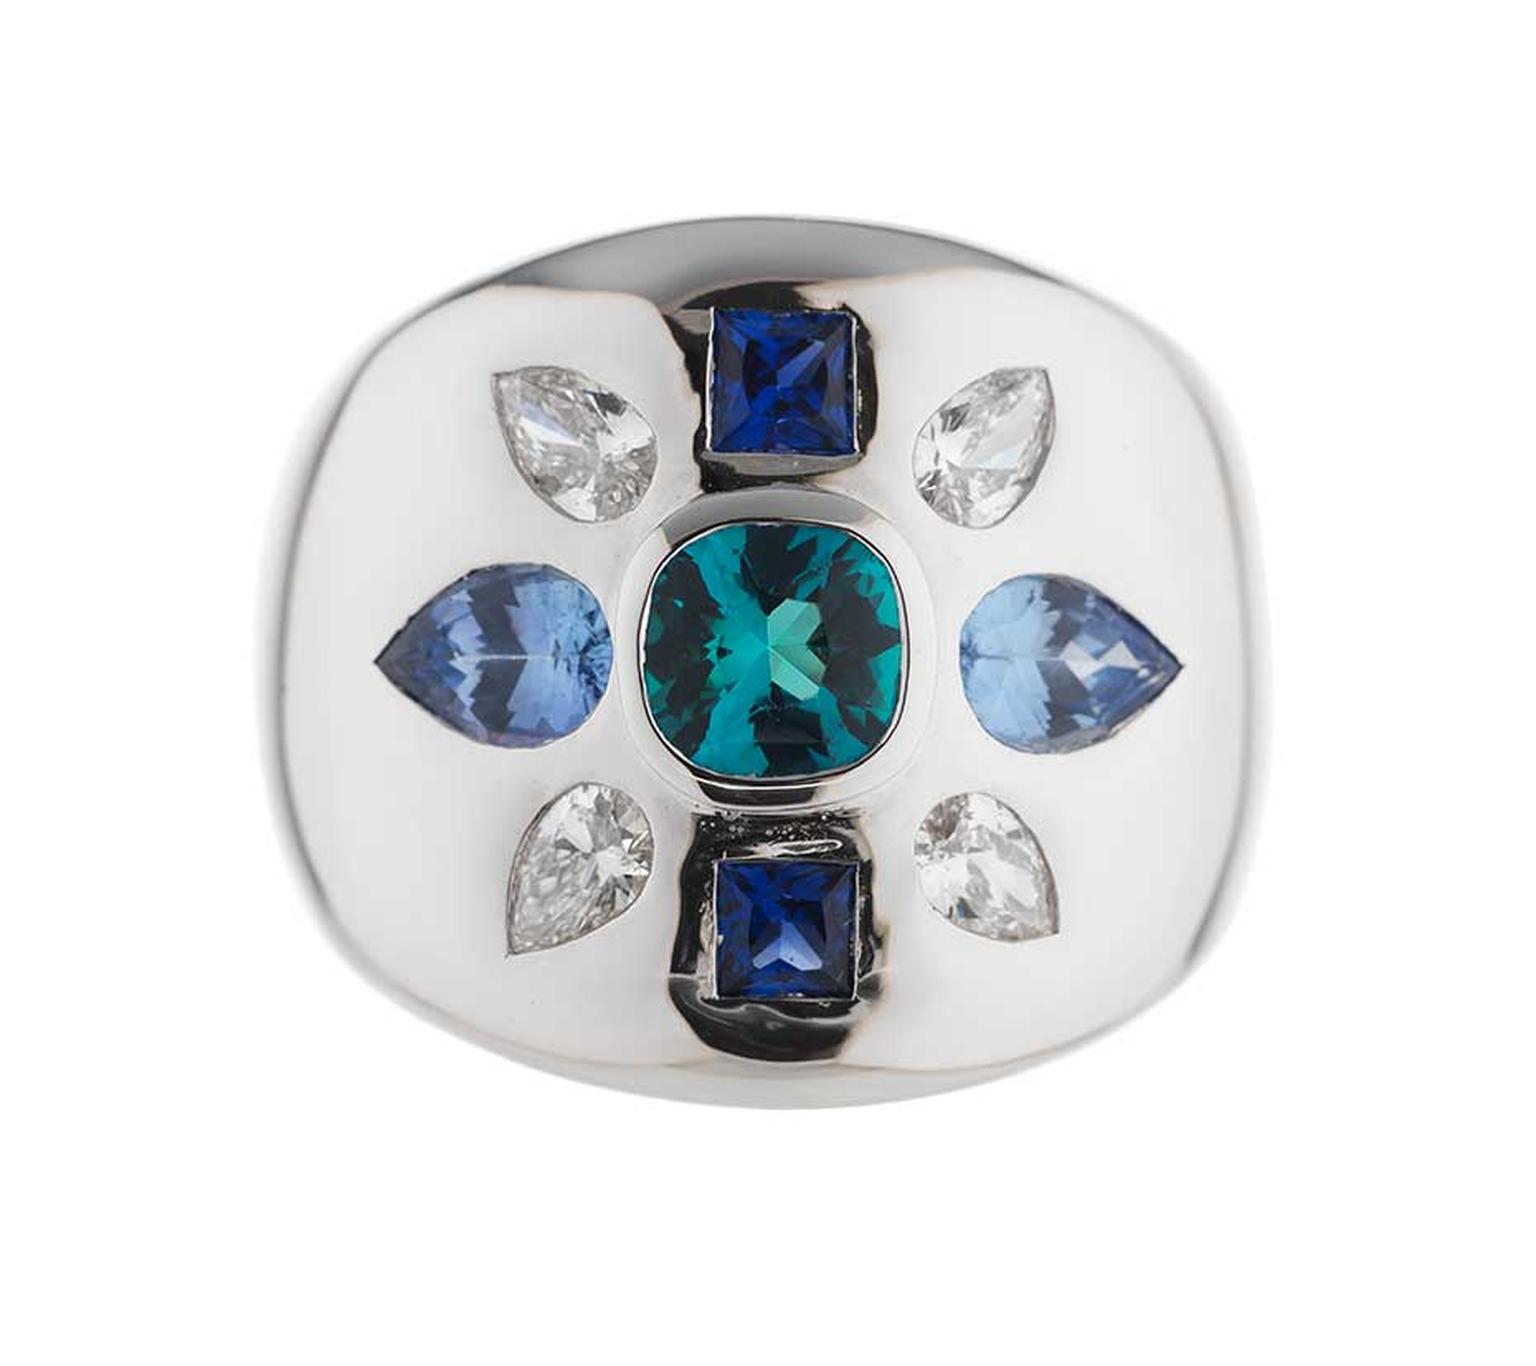 Holts London jewellery collection Empire ring in white gold with a centre tourmaline stone and blue and white sapphires (£4,095).